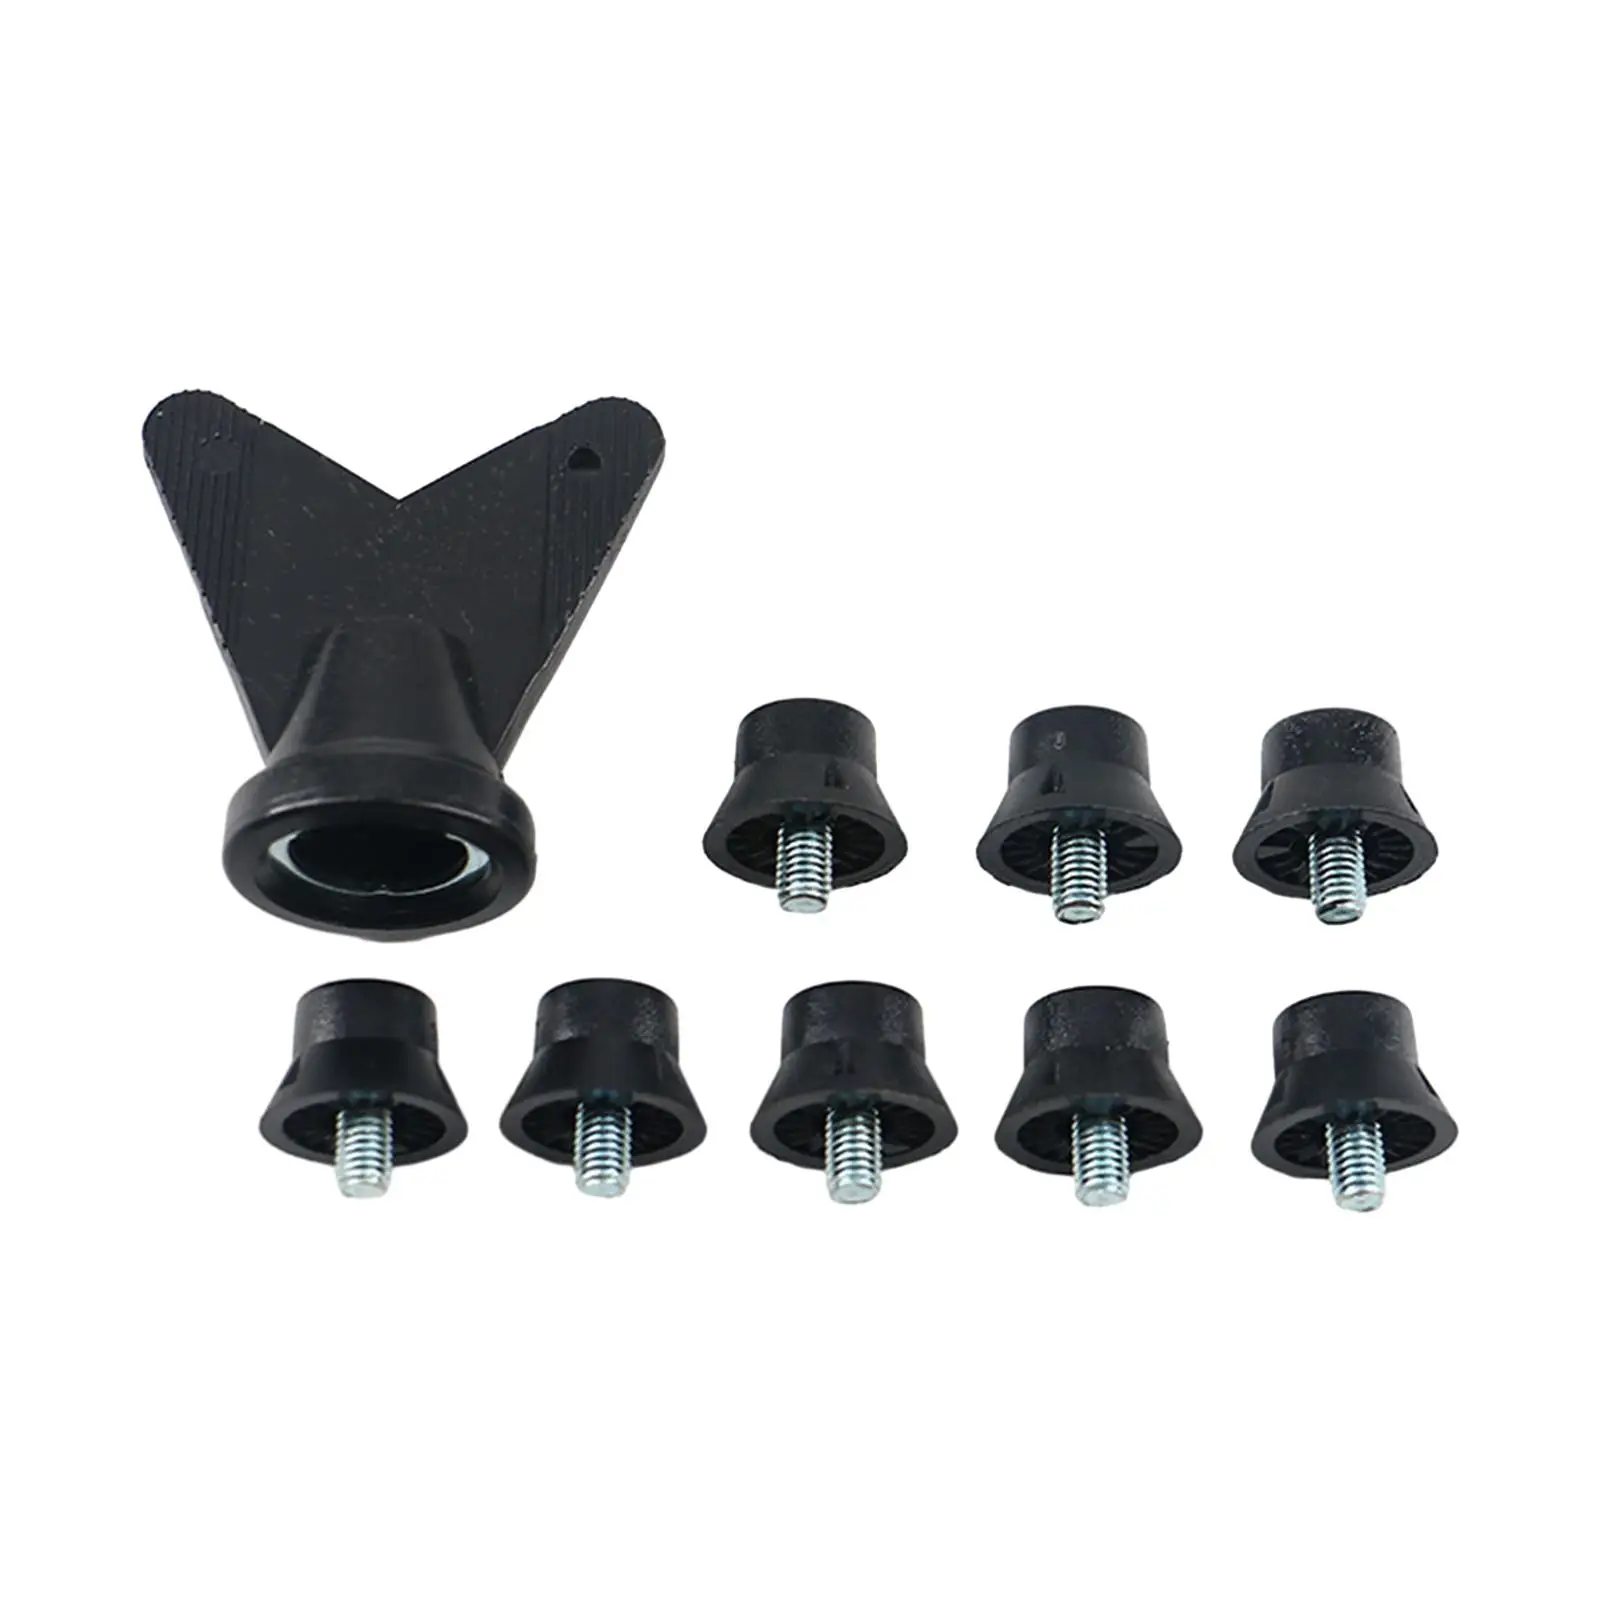 12Pcs Rugby Shoes Studs Thread Screw 5mm Dia Firm Ground Stable Football Boot Spikes for Training Athletic Sneakers Competition